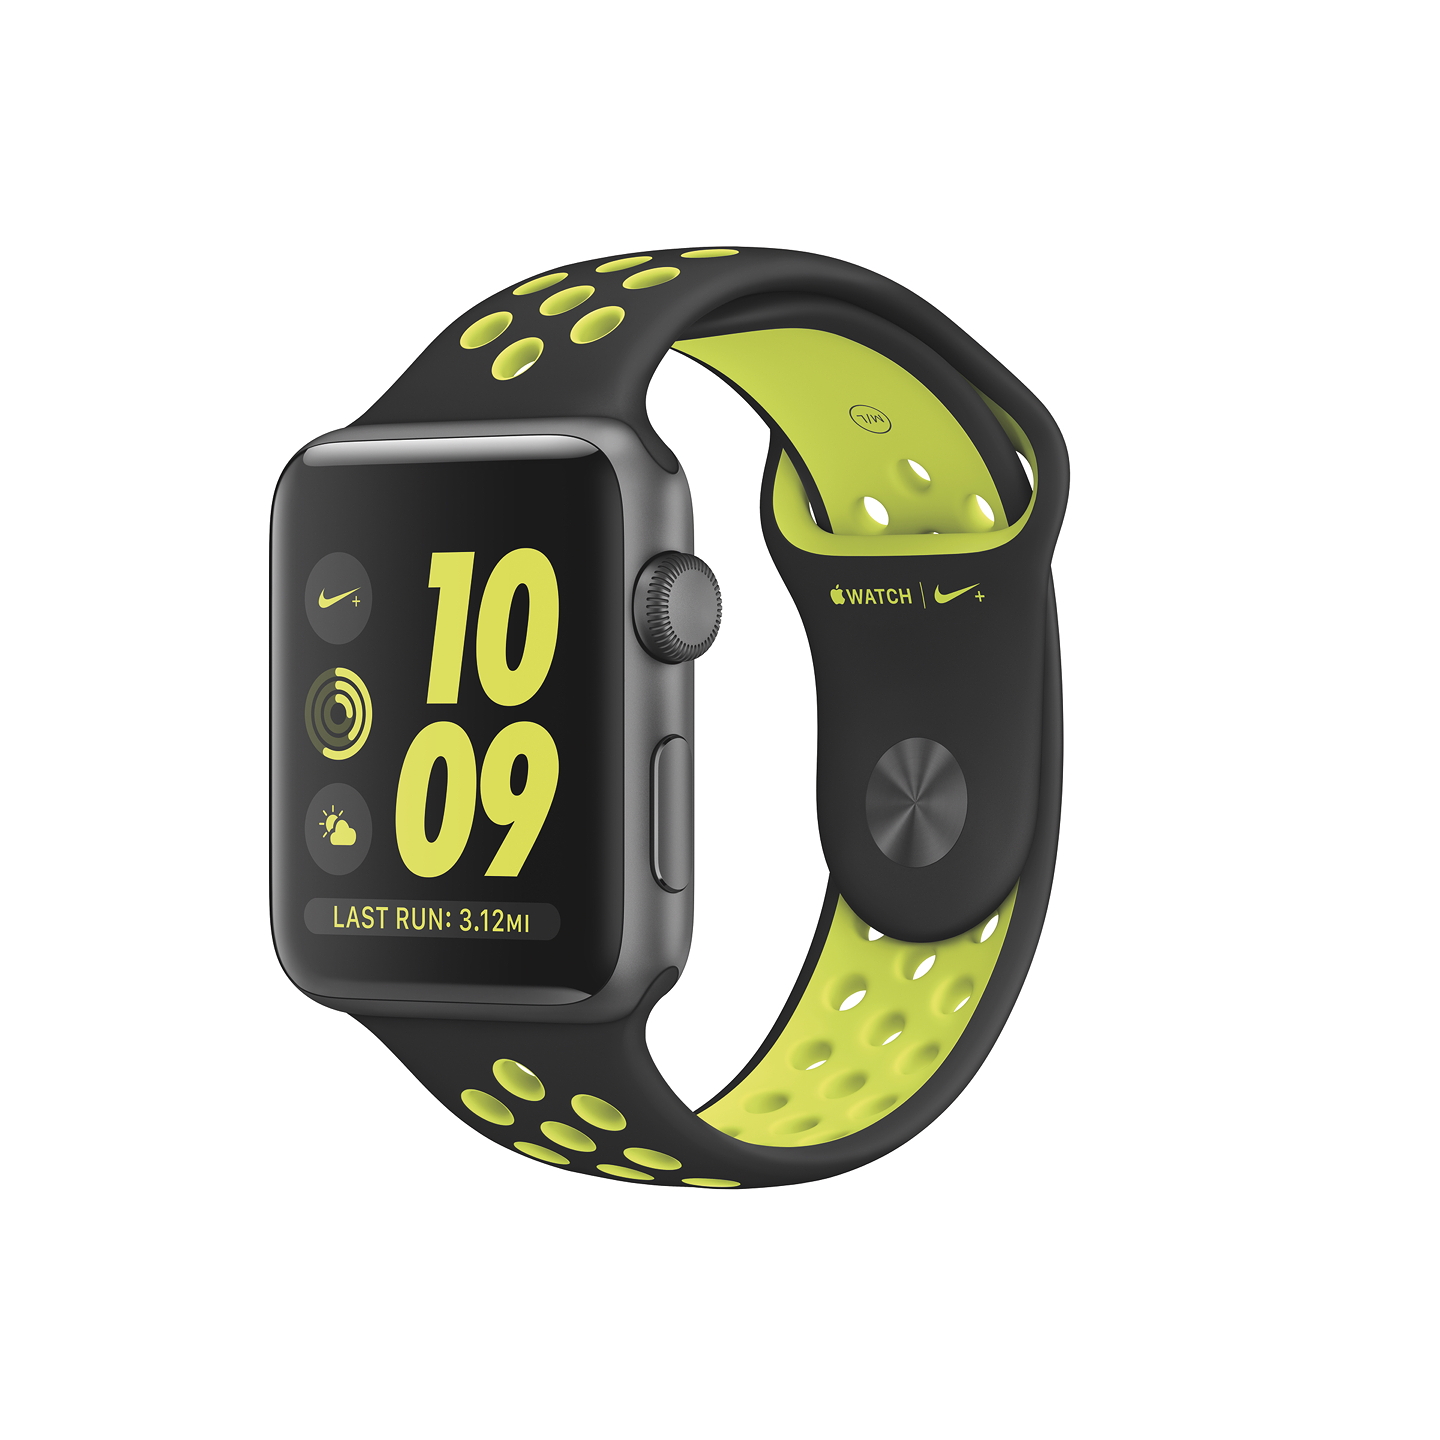 Apple Watch - Image courtesy of Apple